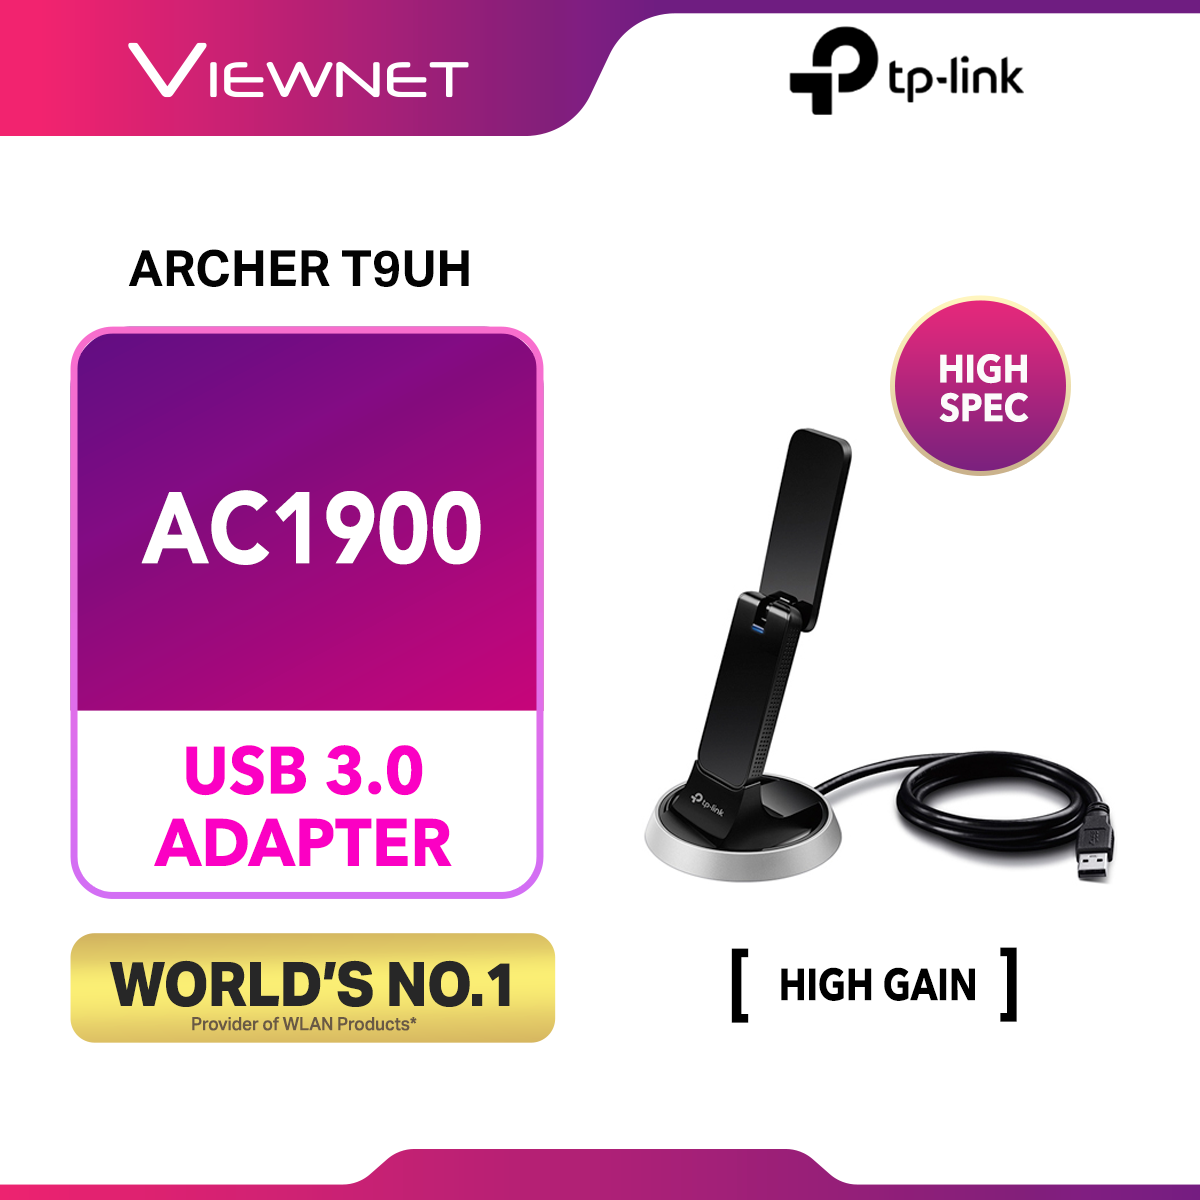 TP-Link Archer T9UH AC1900 Wireless High Gain Dual Band USB Adapter